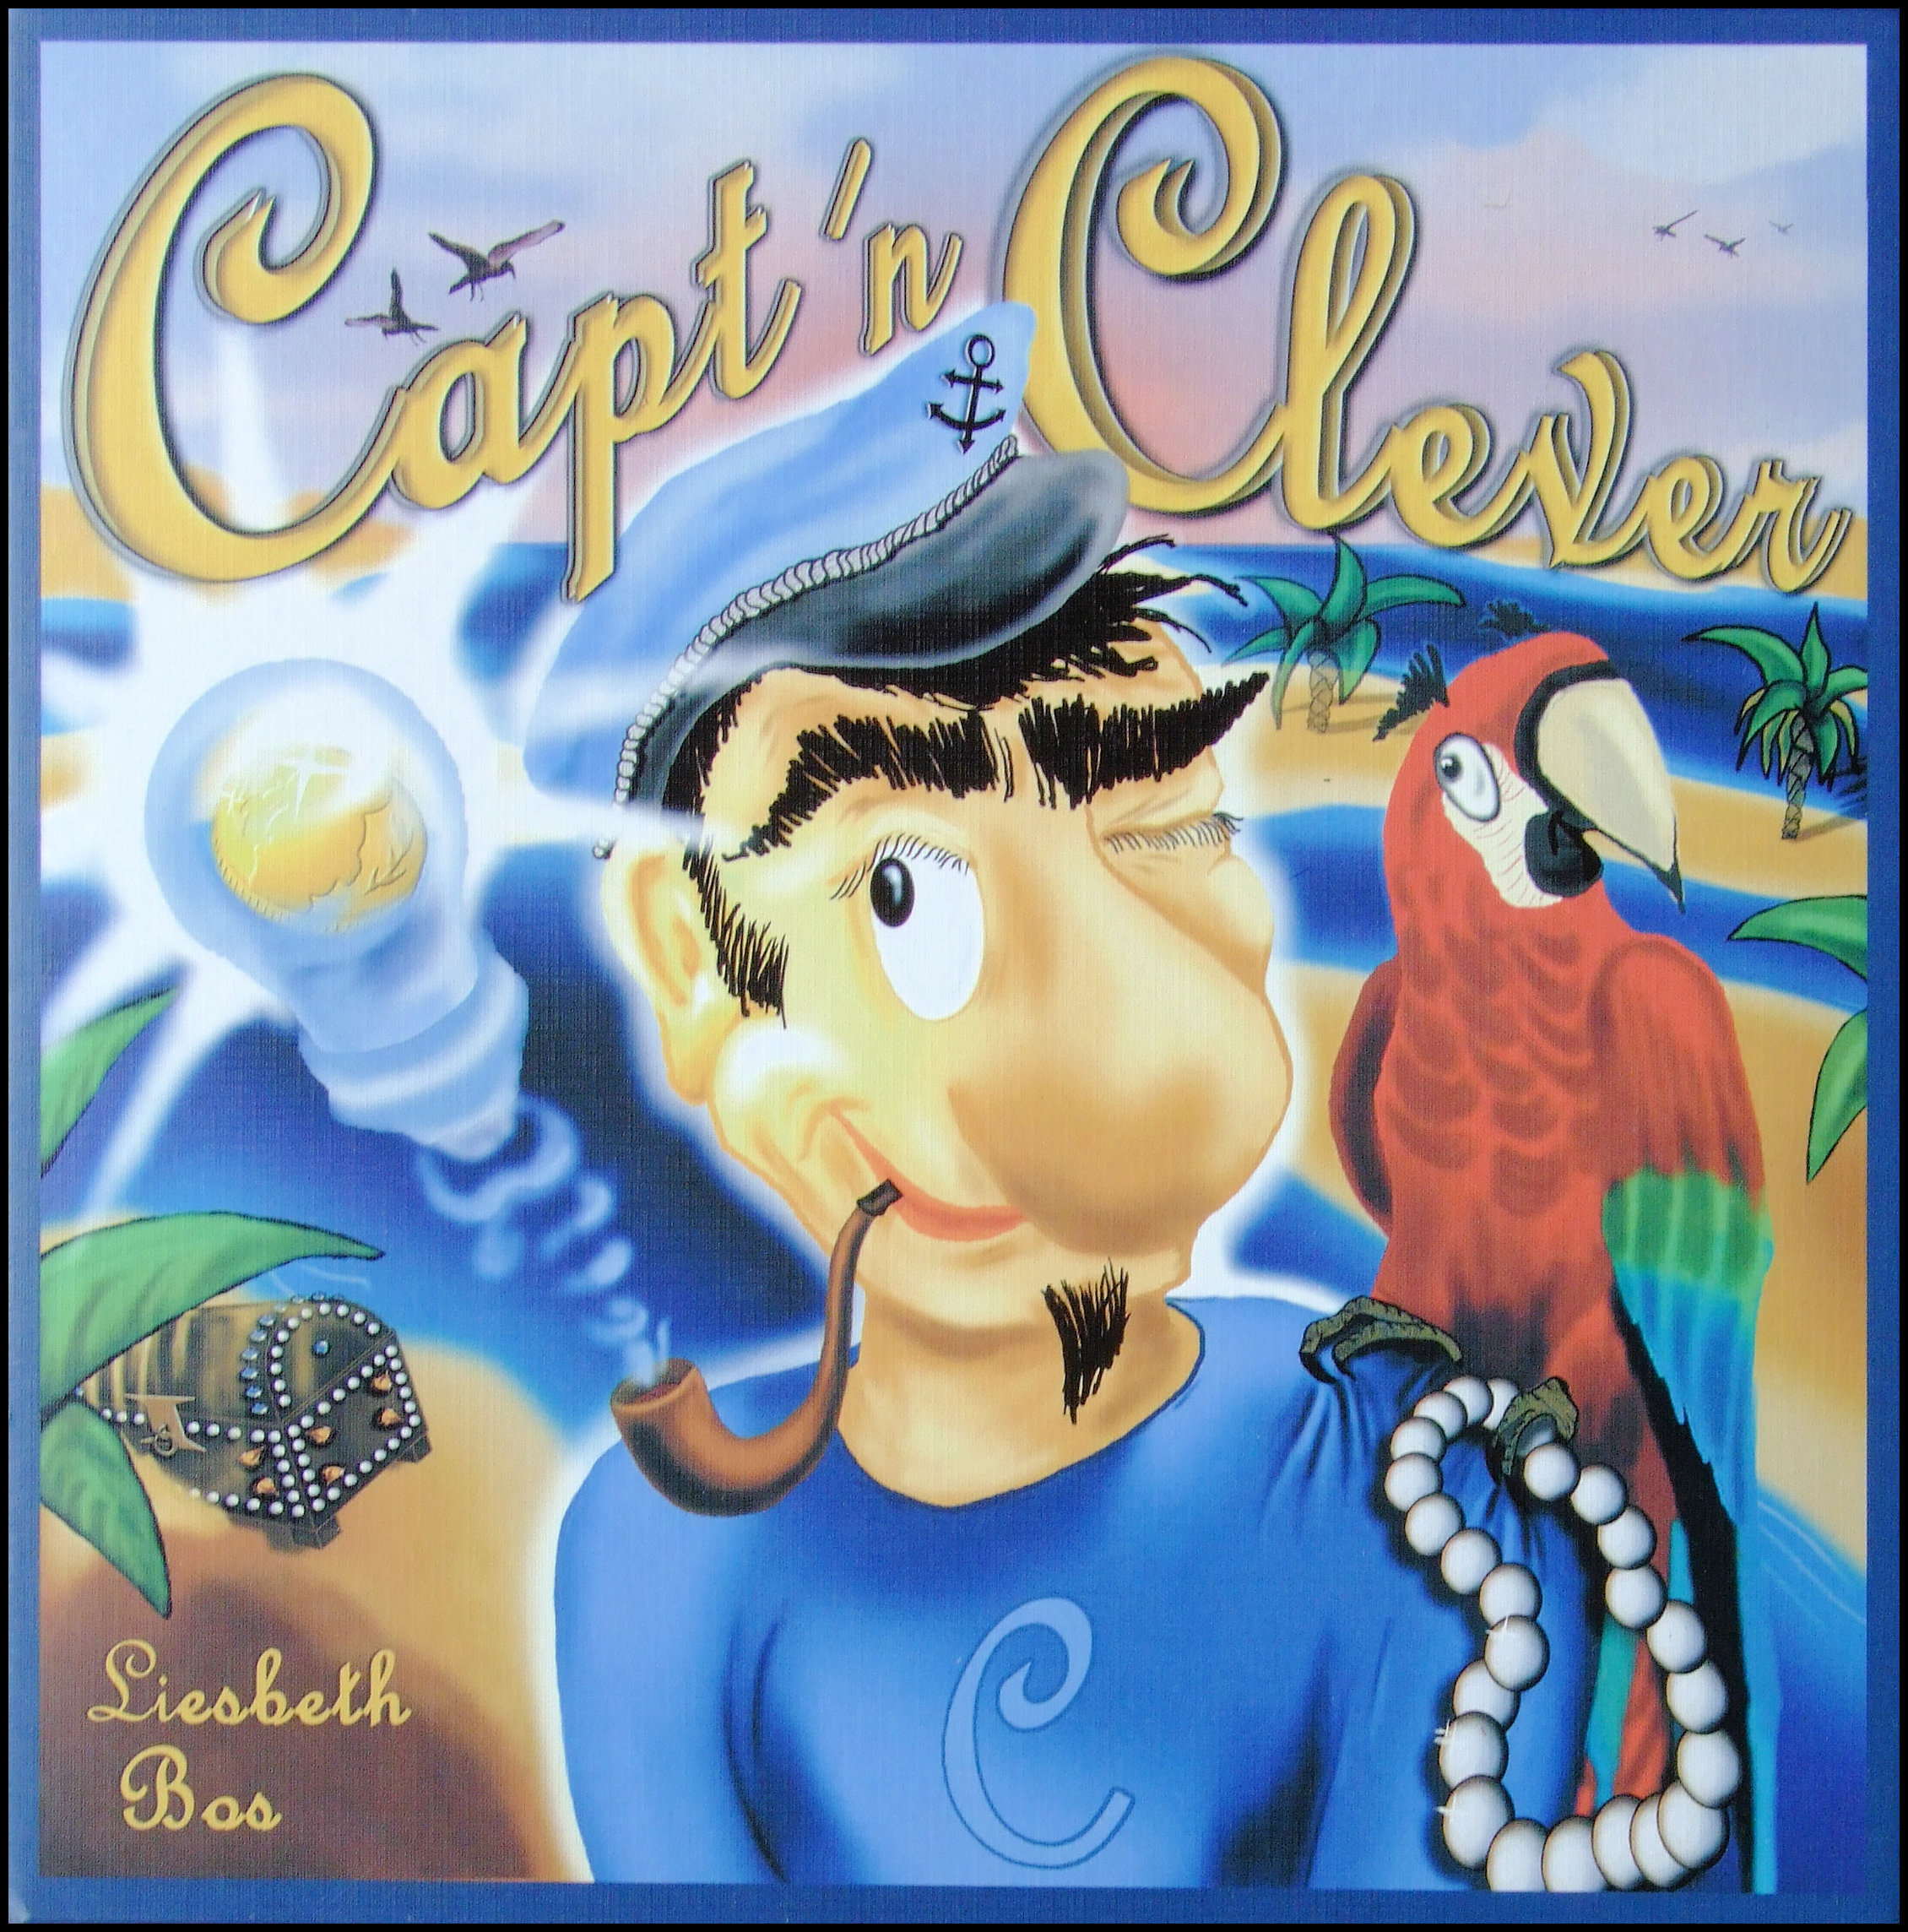 Capt'n Clever - Box Front